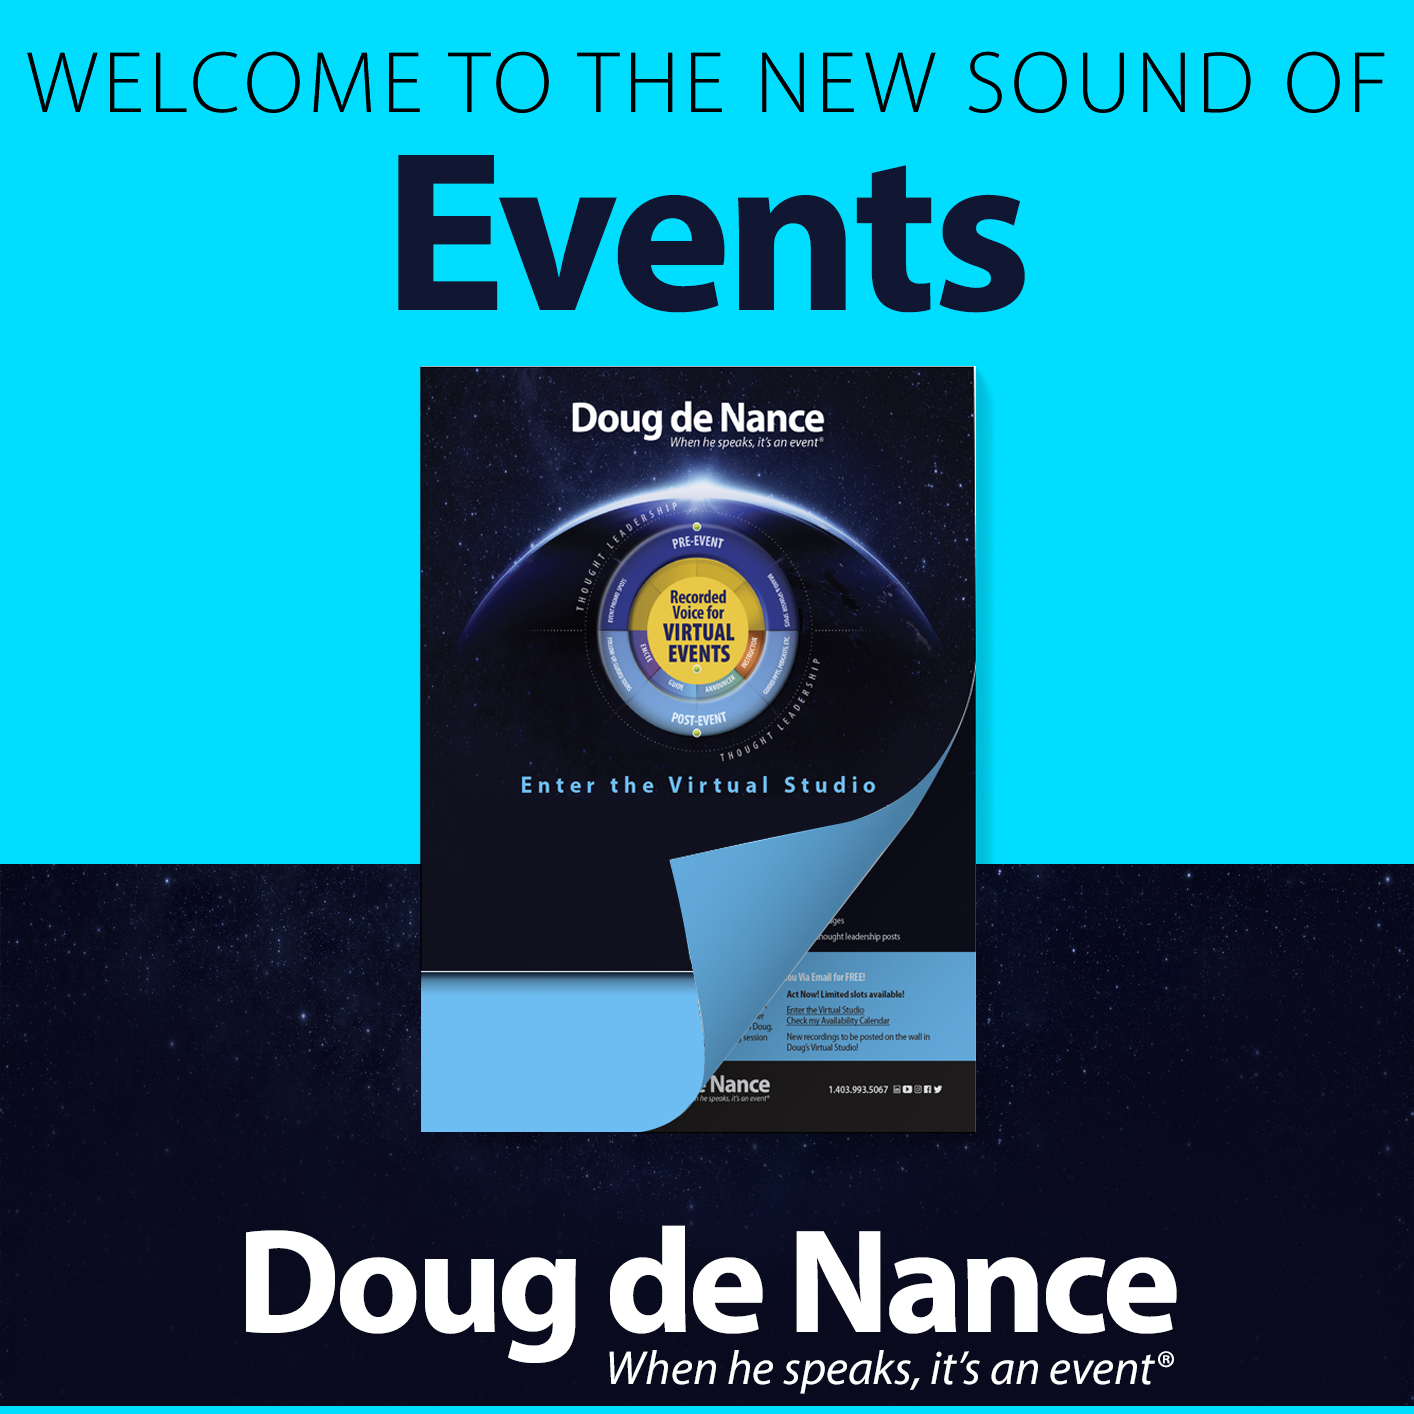 Doug de Nance: welcome to the new sound of events